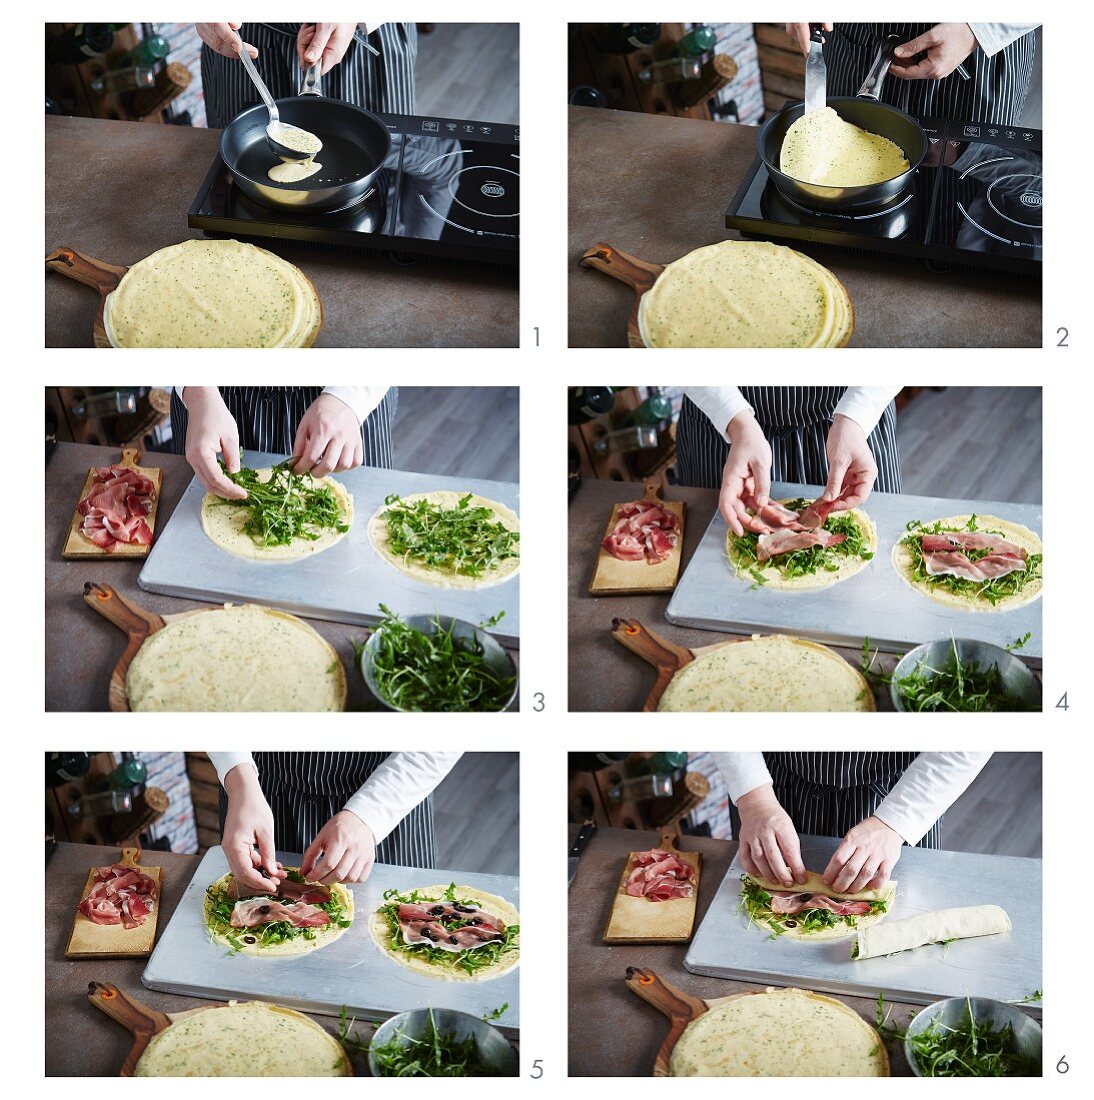 Crêpes filled with ham and rocket being made